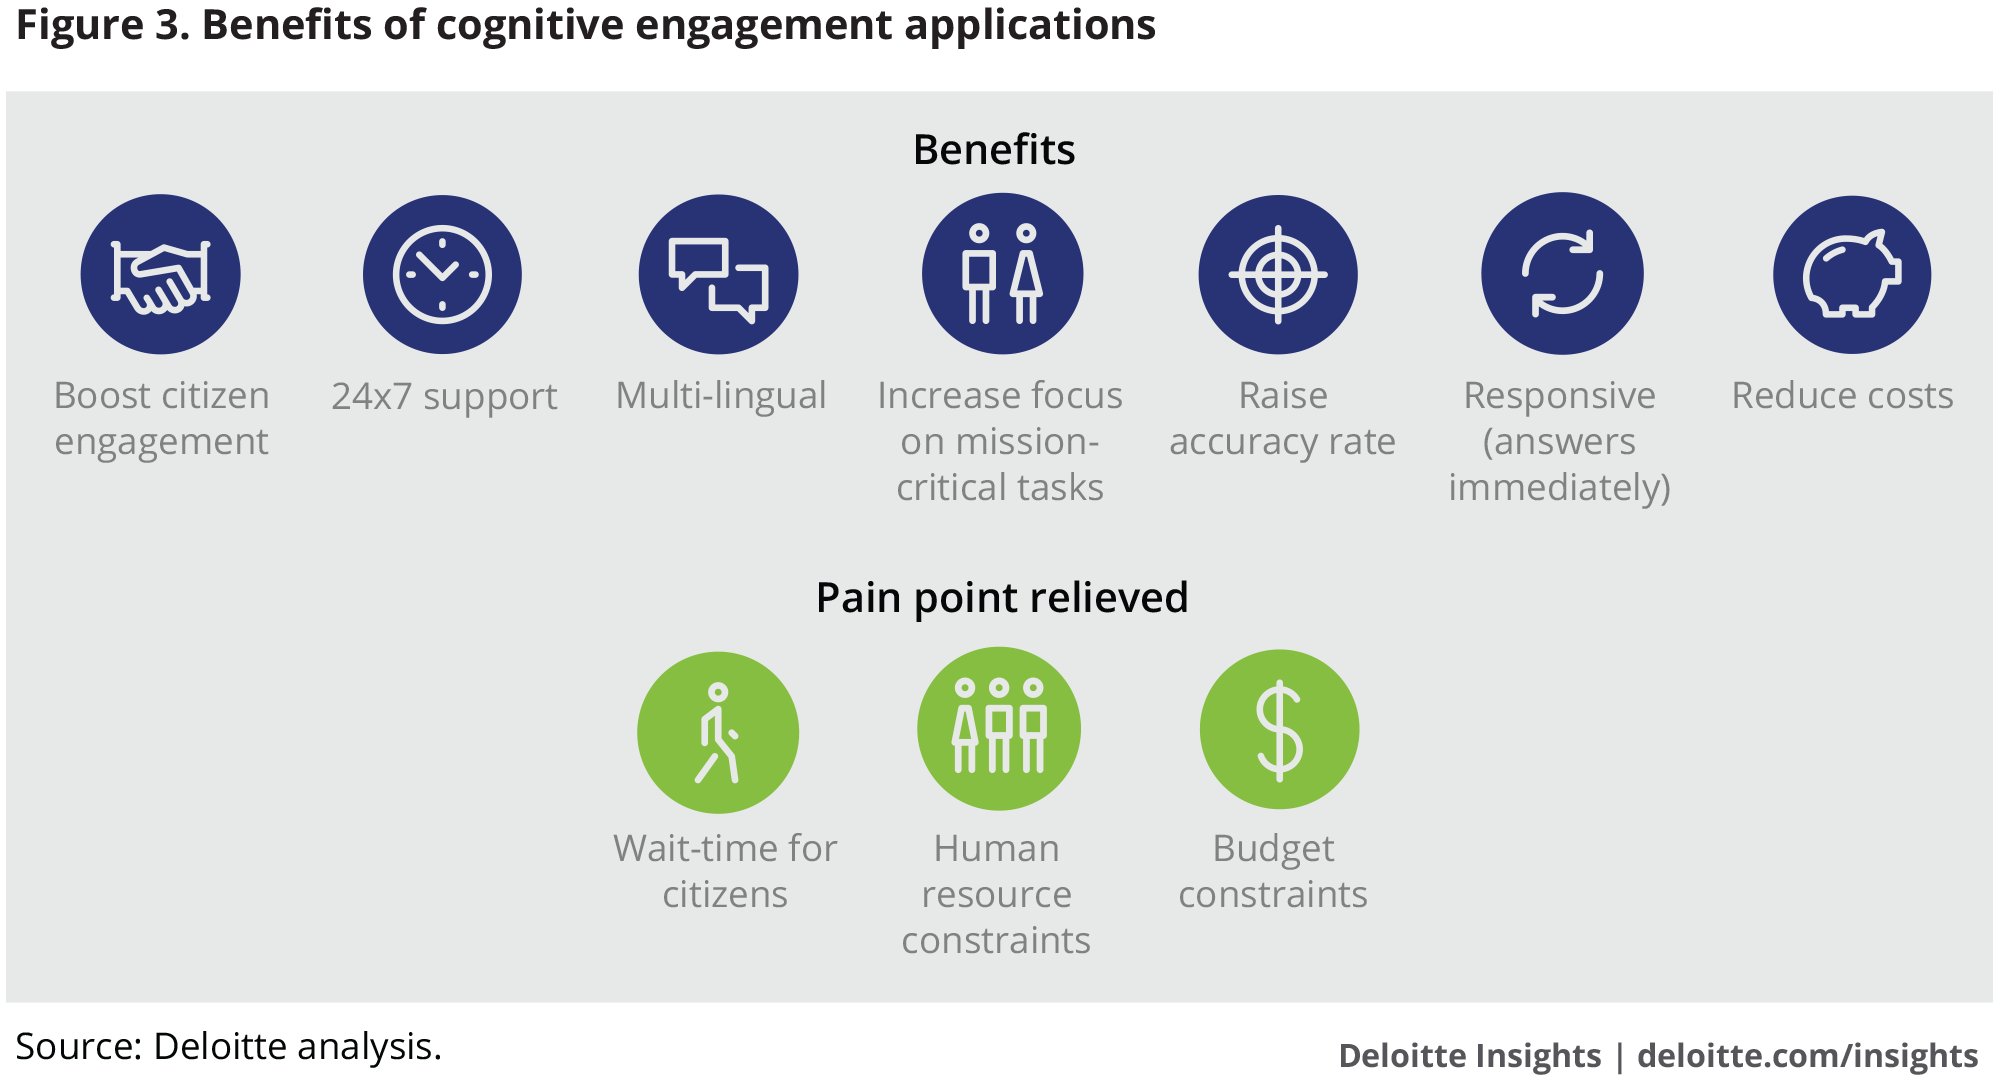 Benefits of cognitive engagement applications